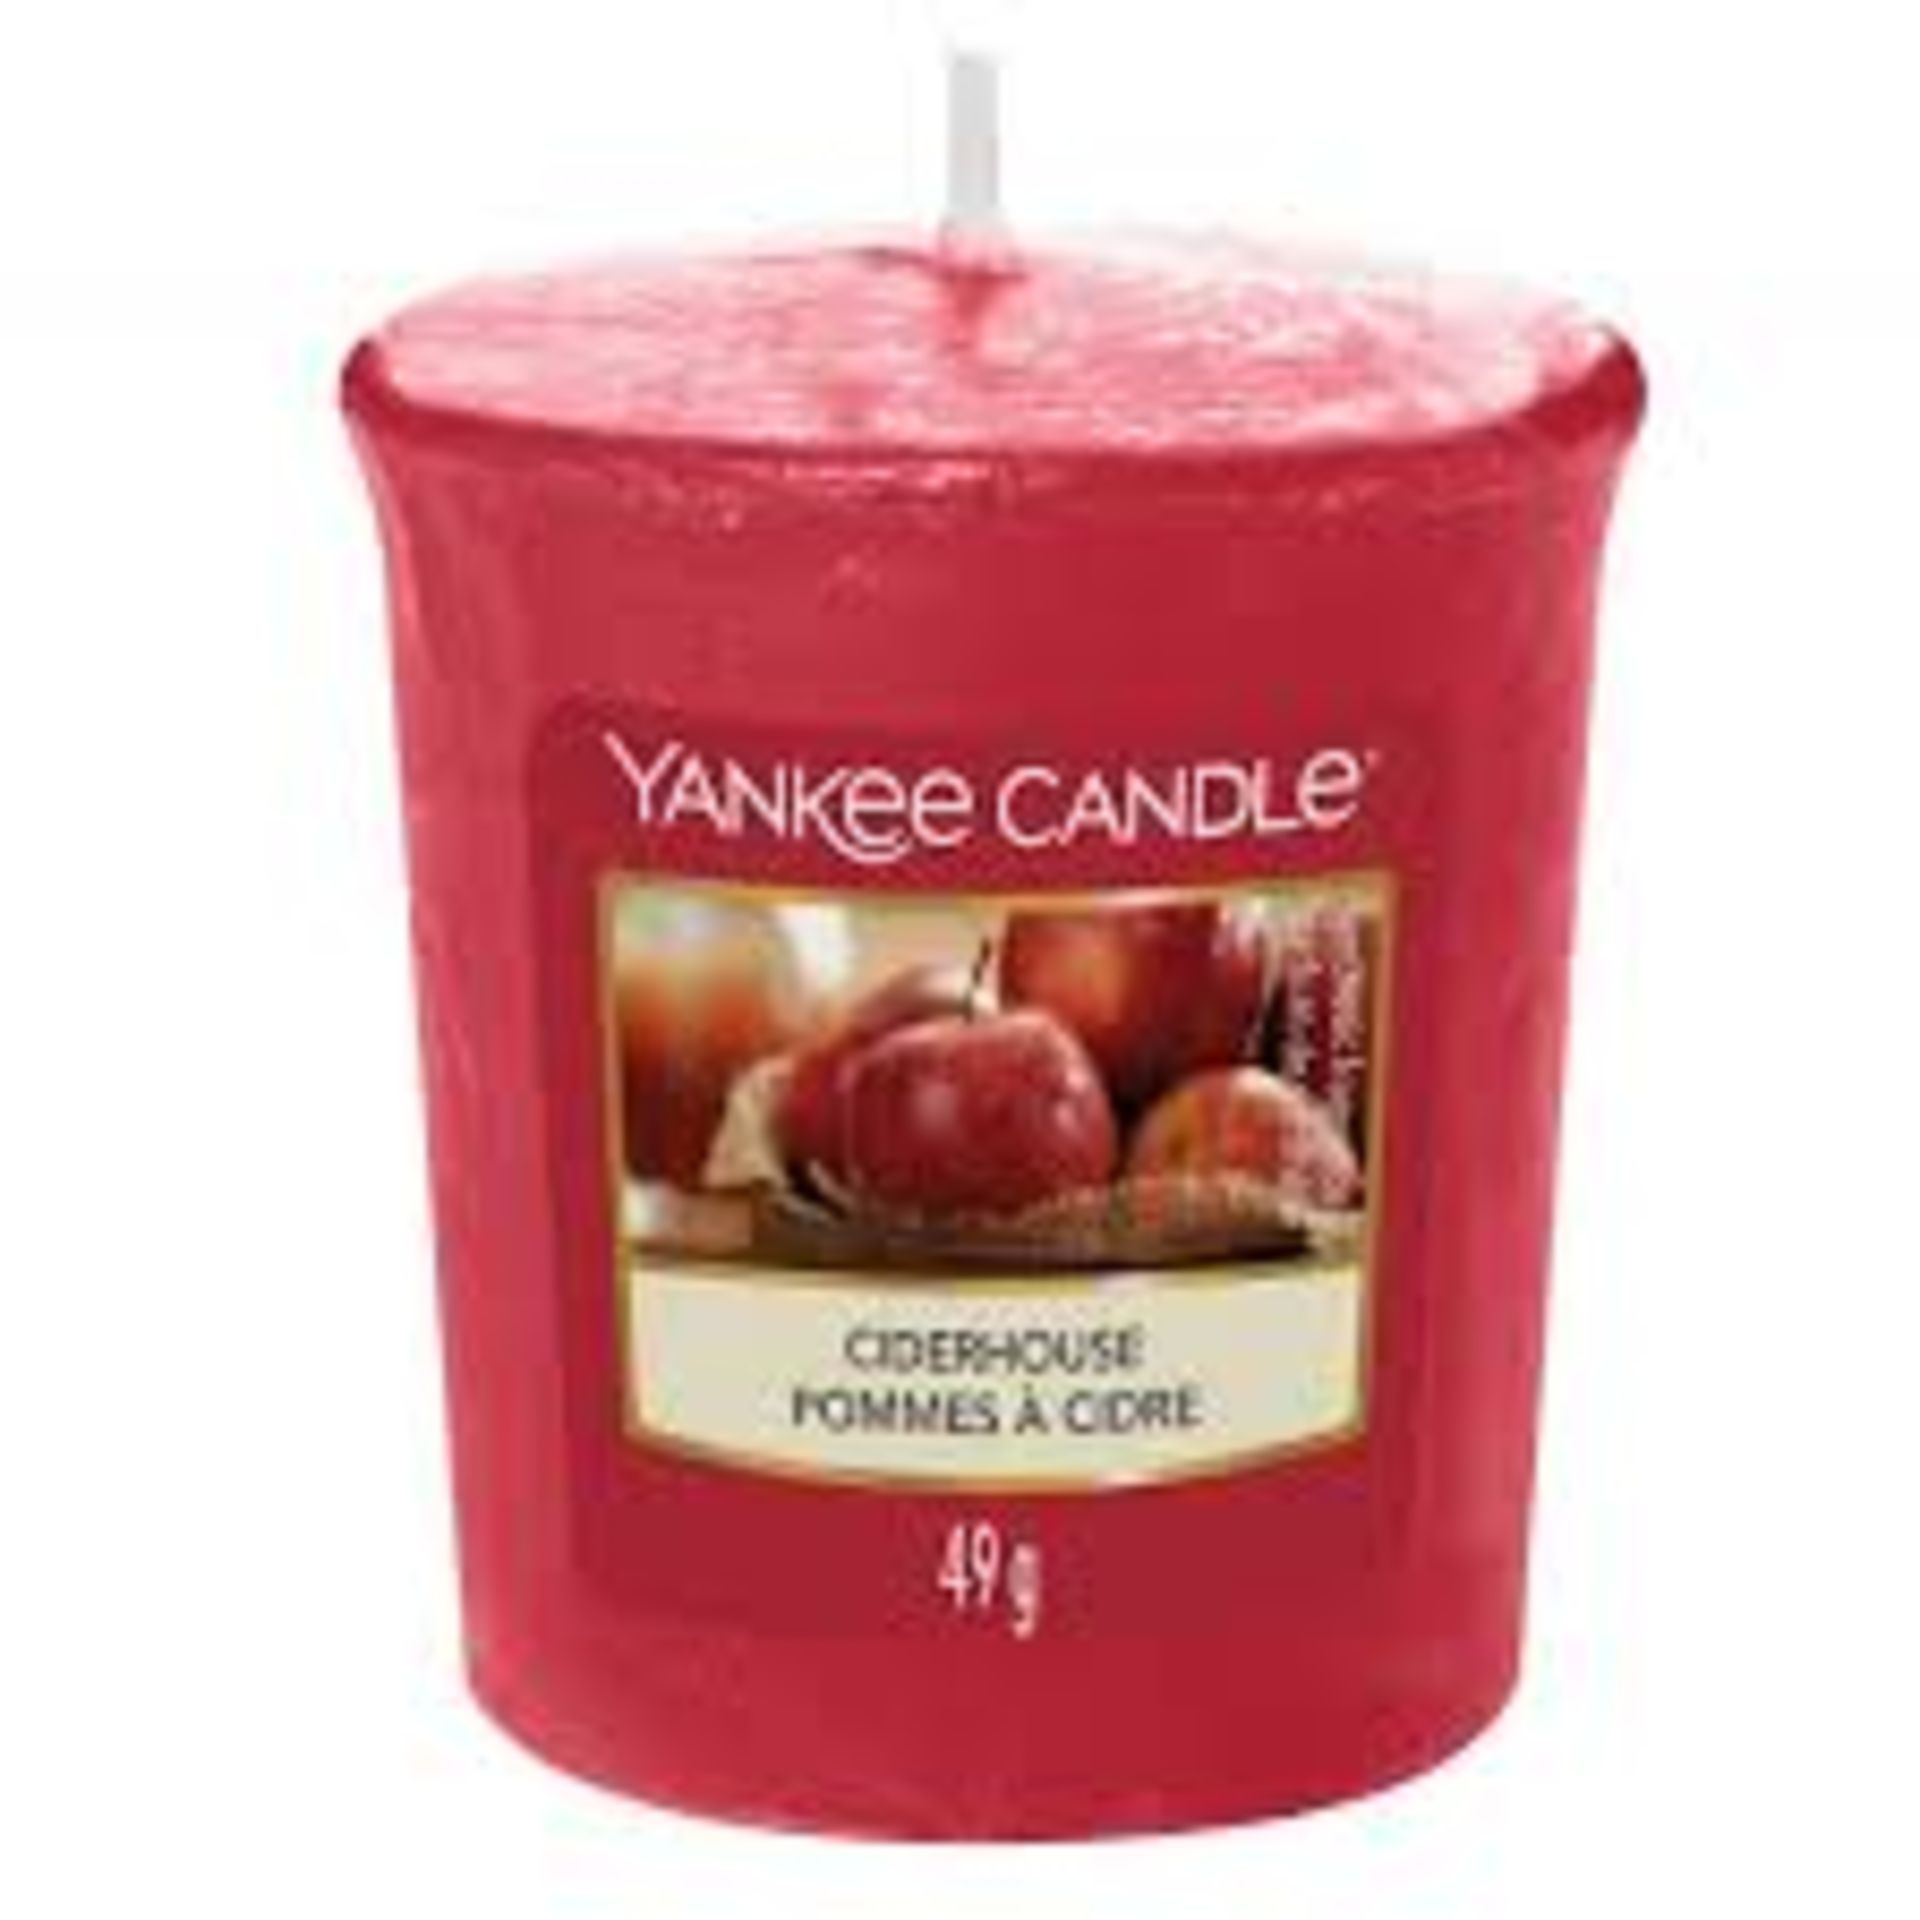 V Brand New 18 x Yankee Candle Votive - Cider House - RRP £35.82 - Item Is Available Approx 5